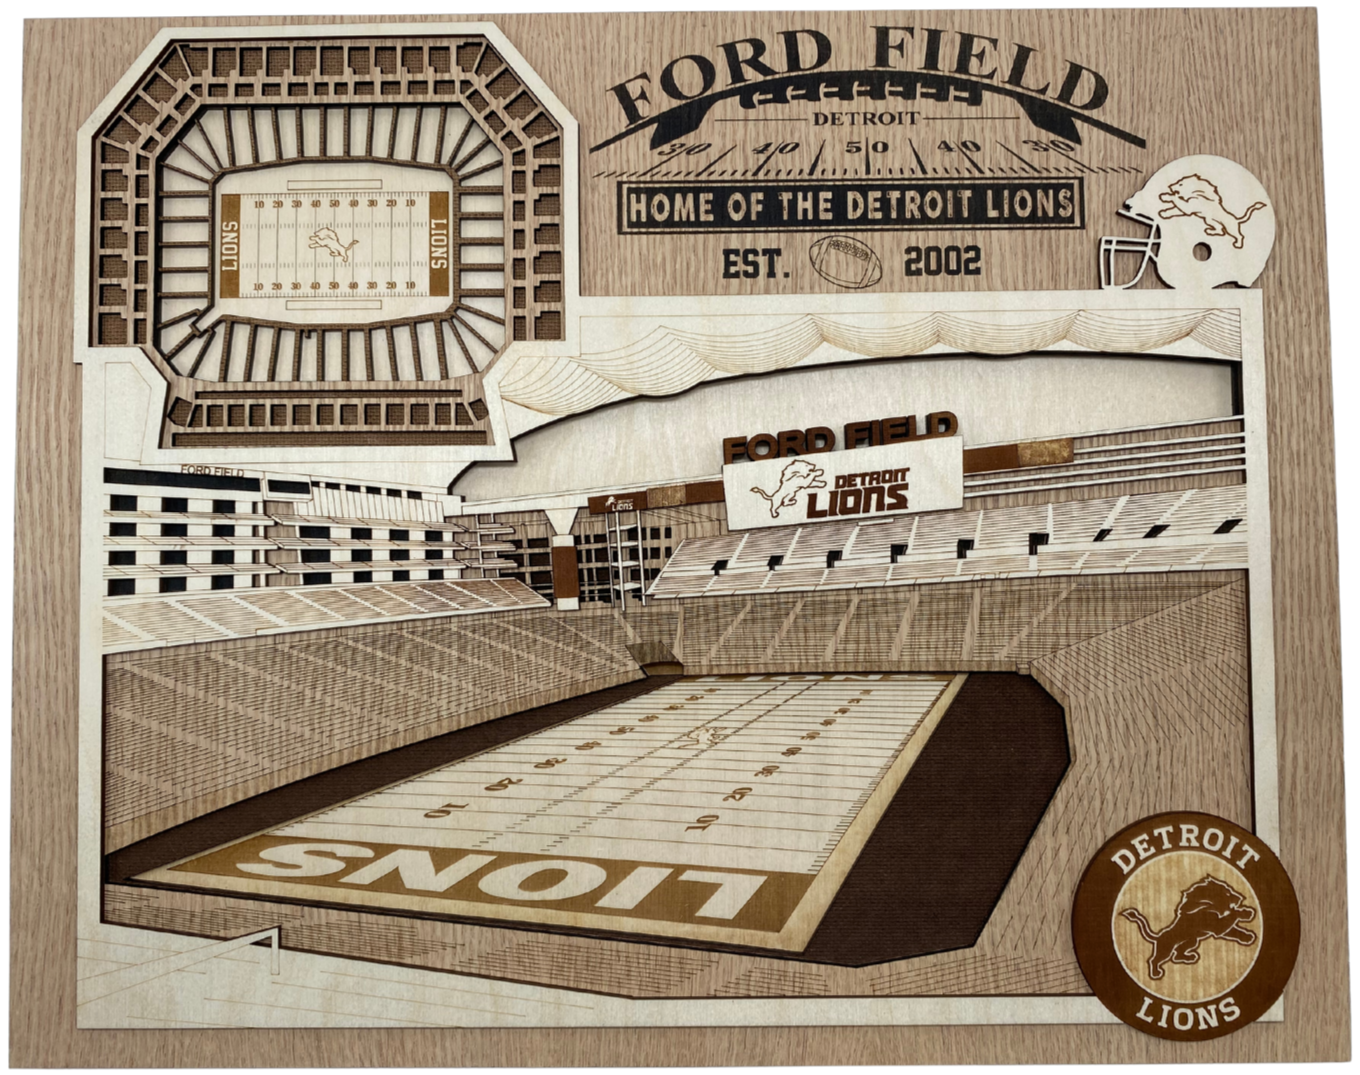 Ford Field - Home of the Detroit Lions - Layered Wooden Stadium with the Inside View of the Football Stadium